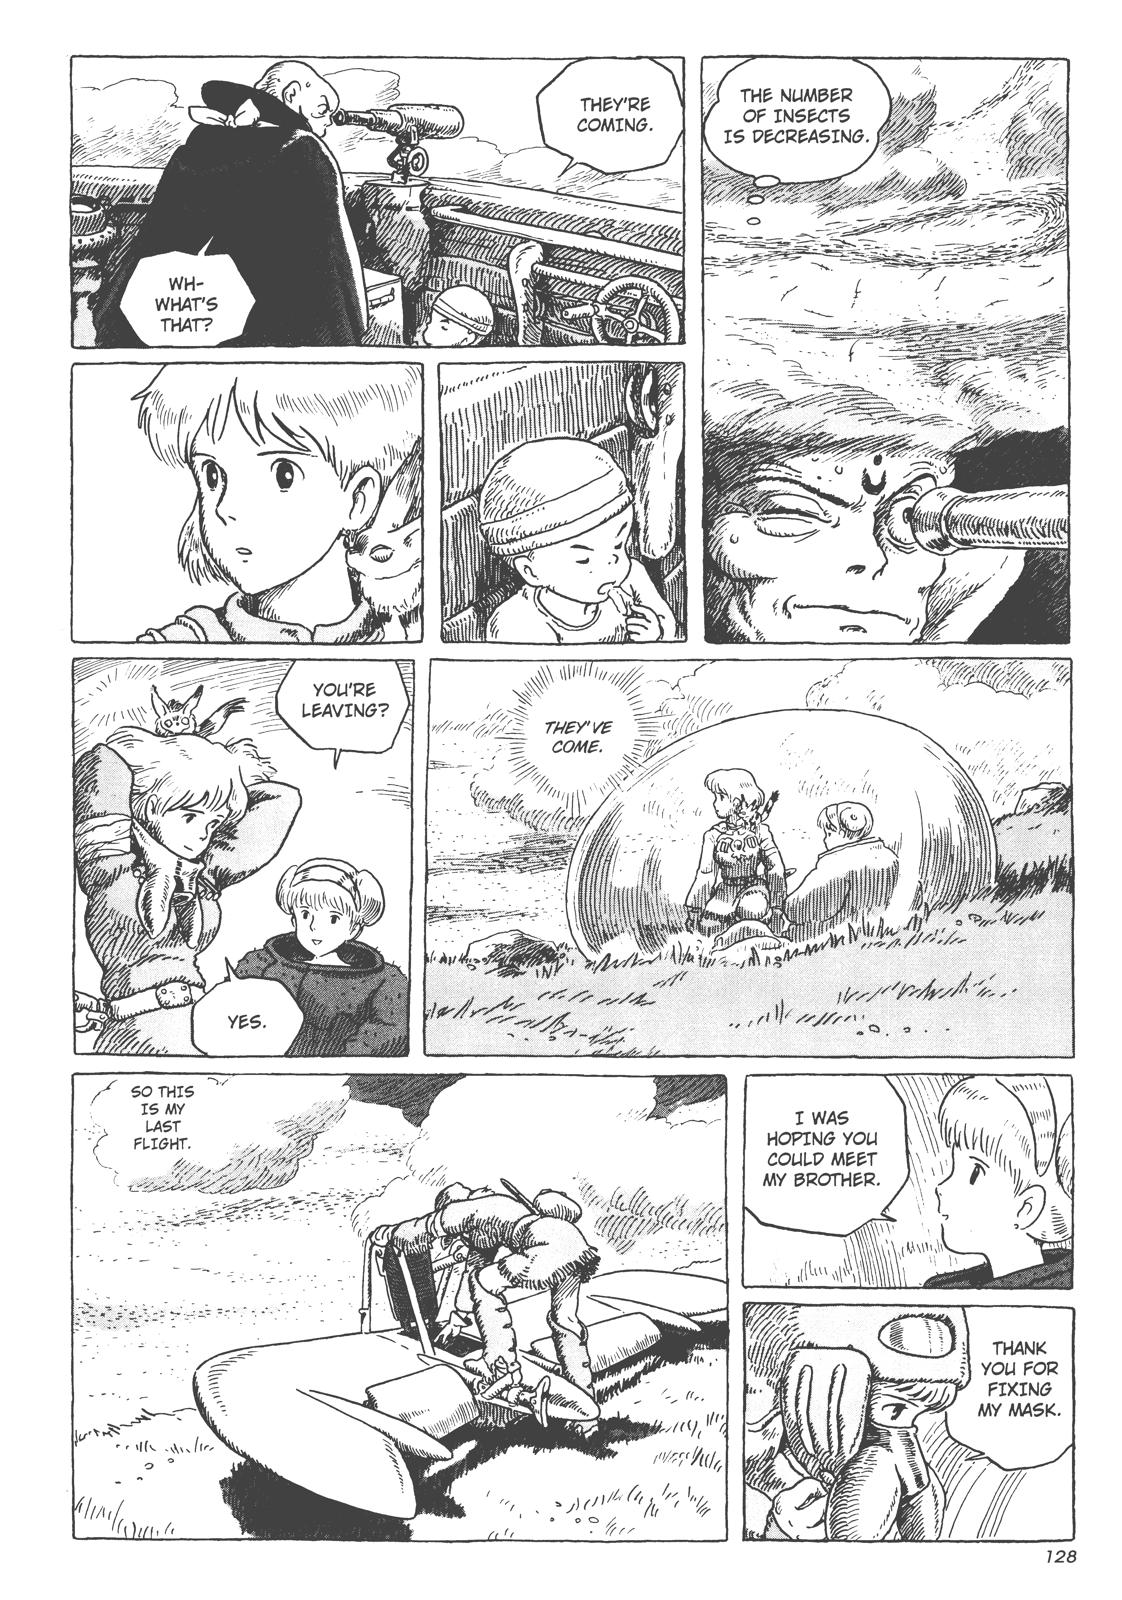 Nausicaä Of The Valley Of The Wind, Chapter 5 image 127